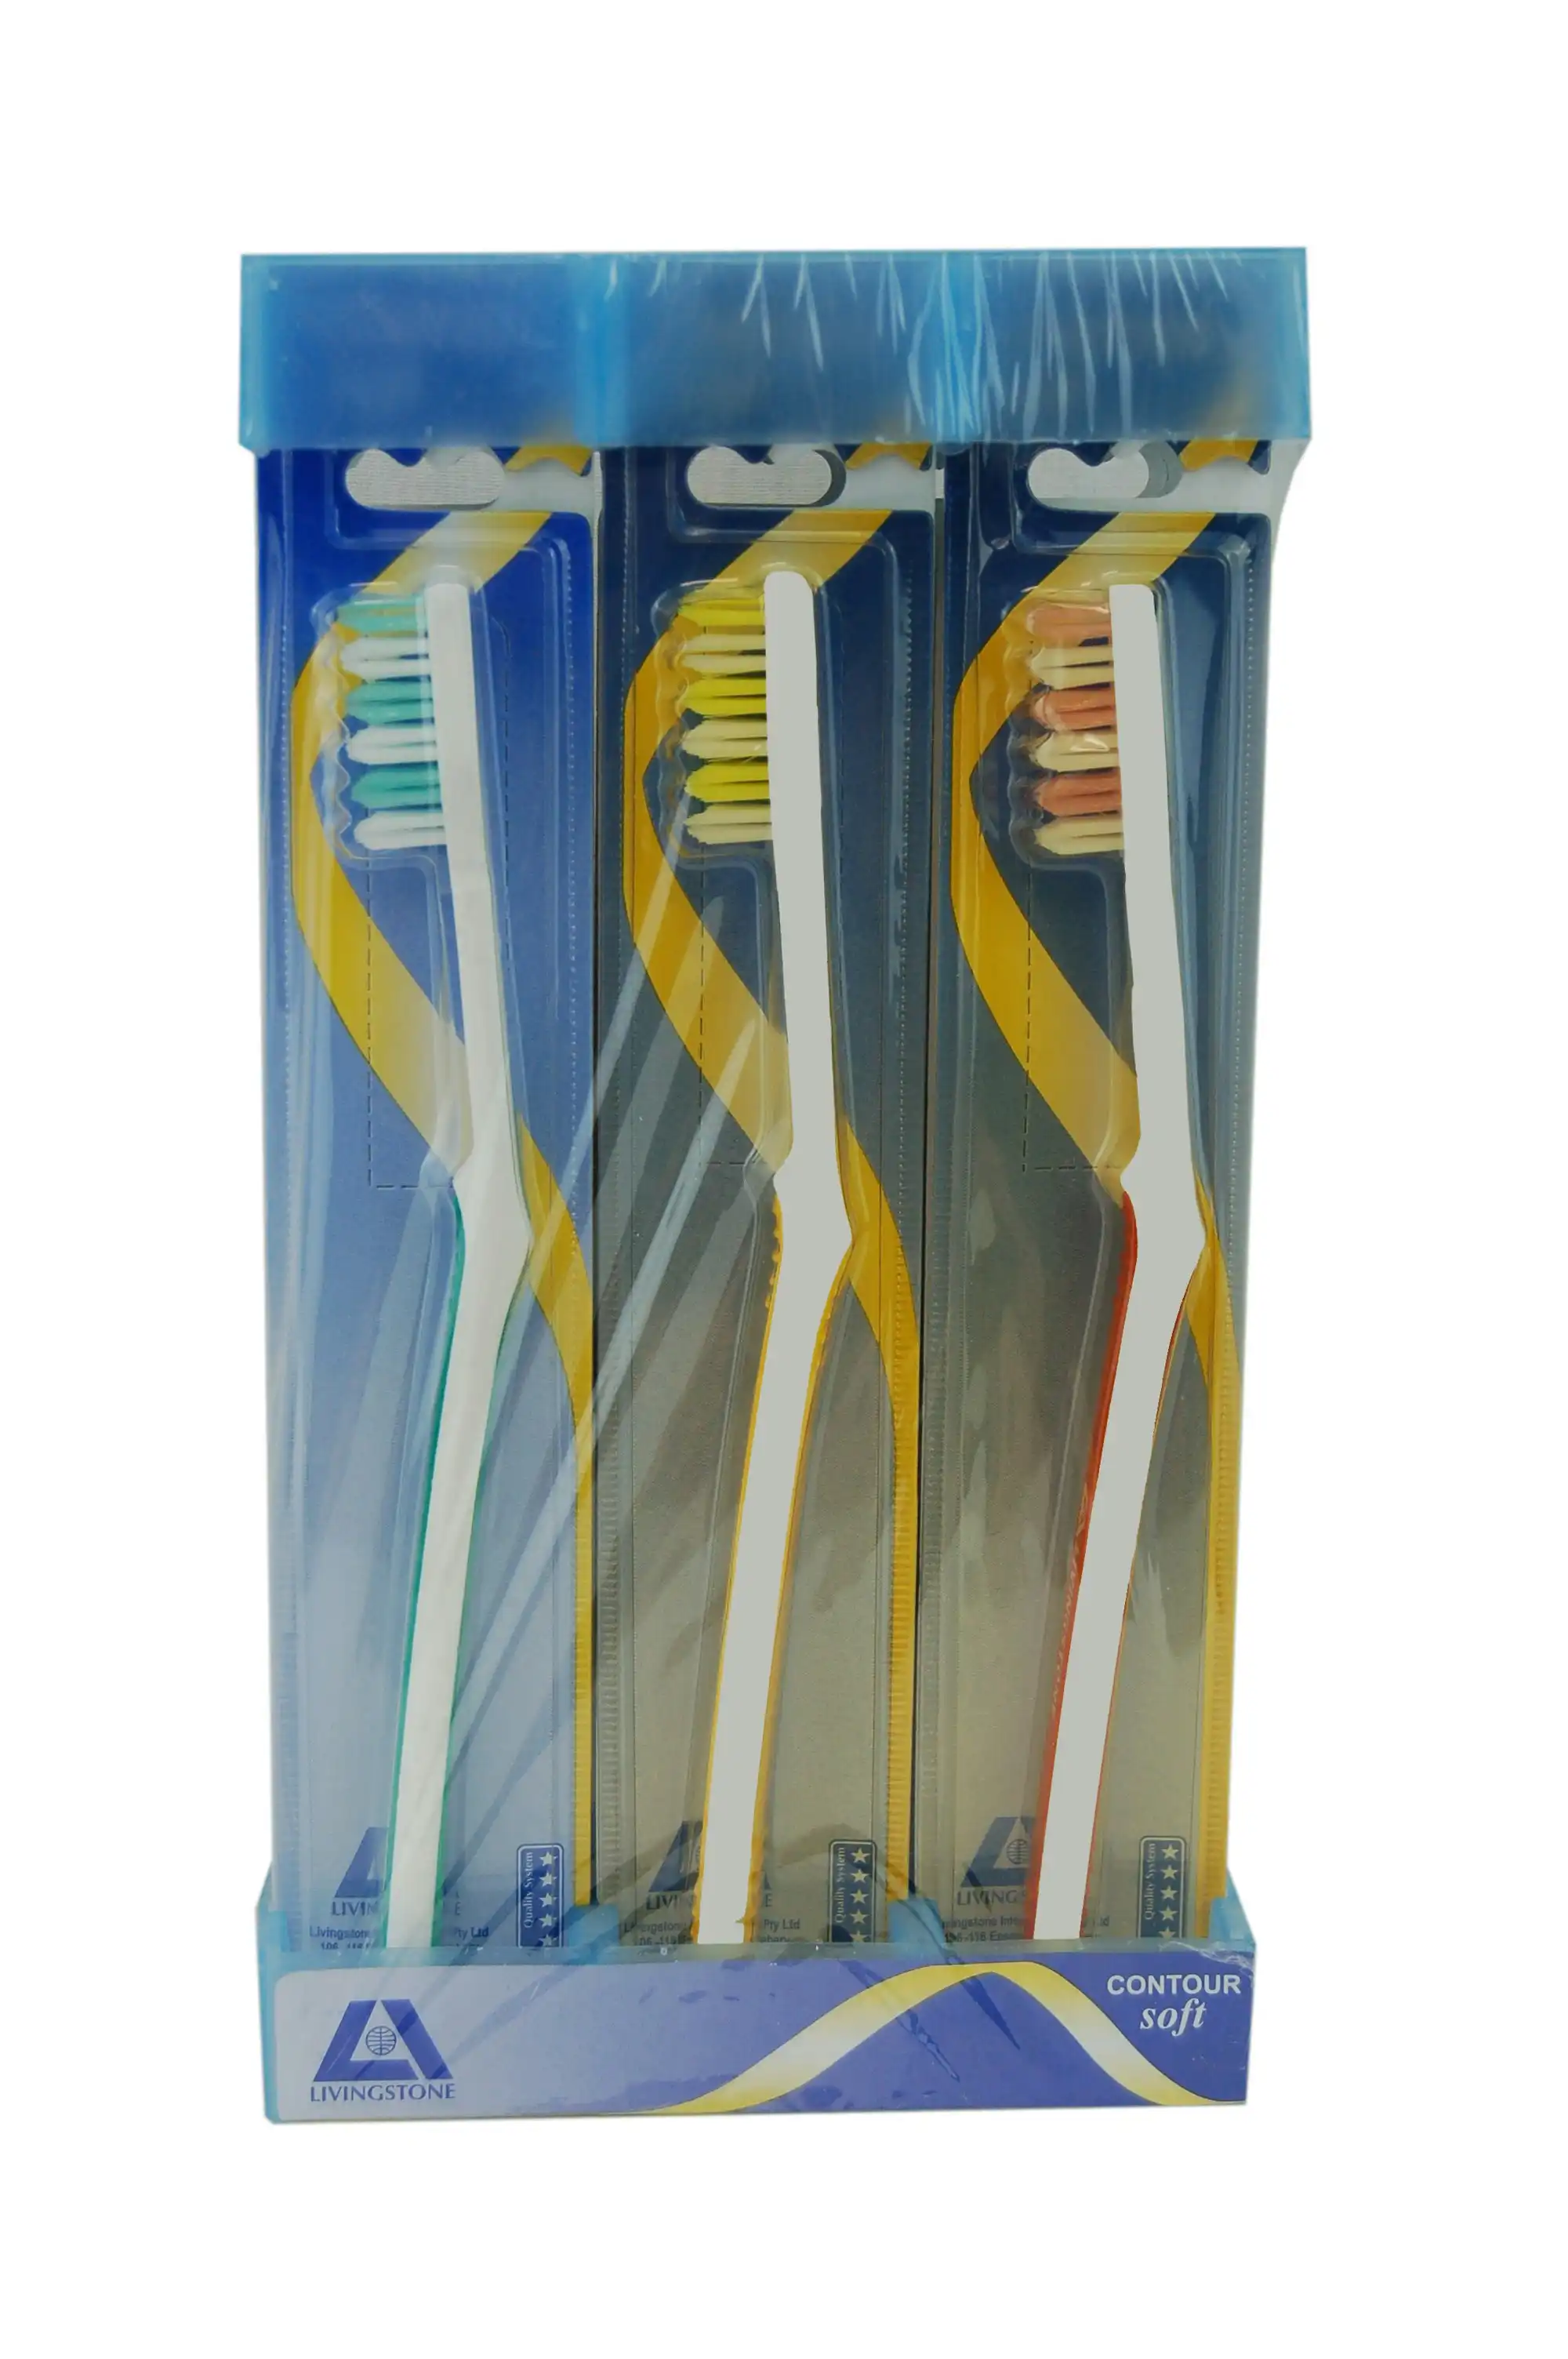 Livingstone Special White Toothbrush Adult Contour Head Soft Bristles 12 Pack